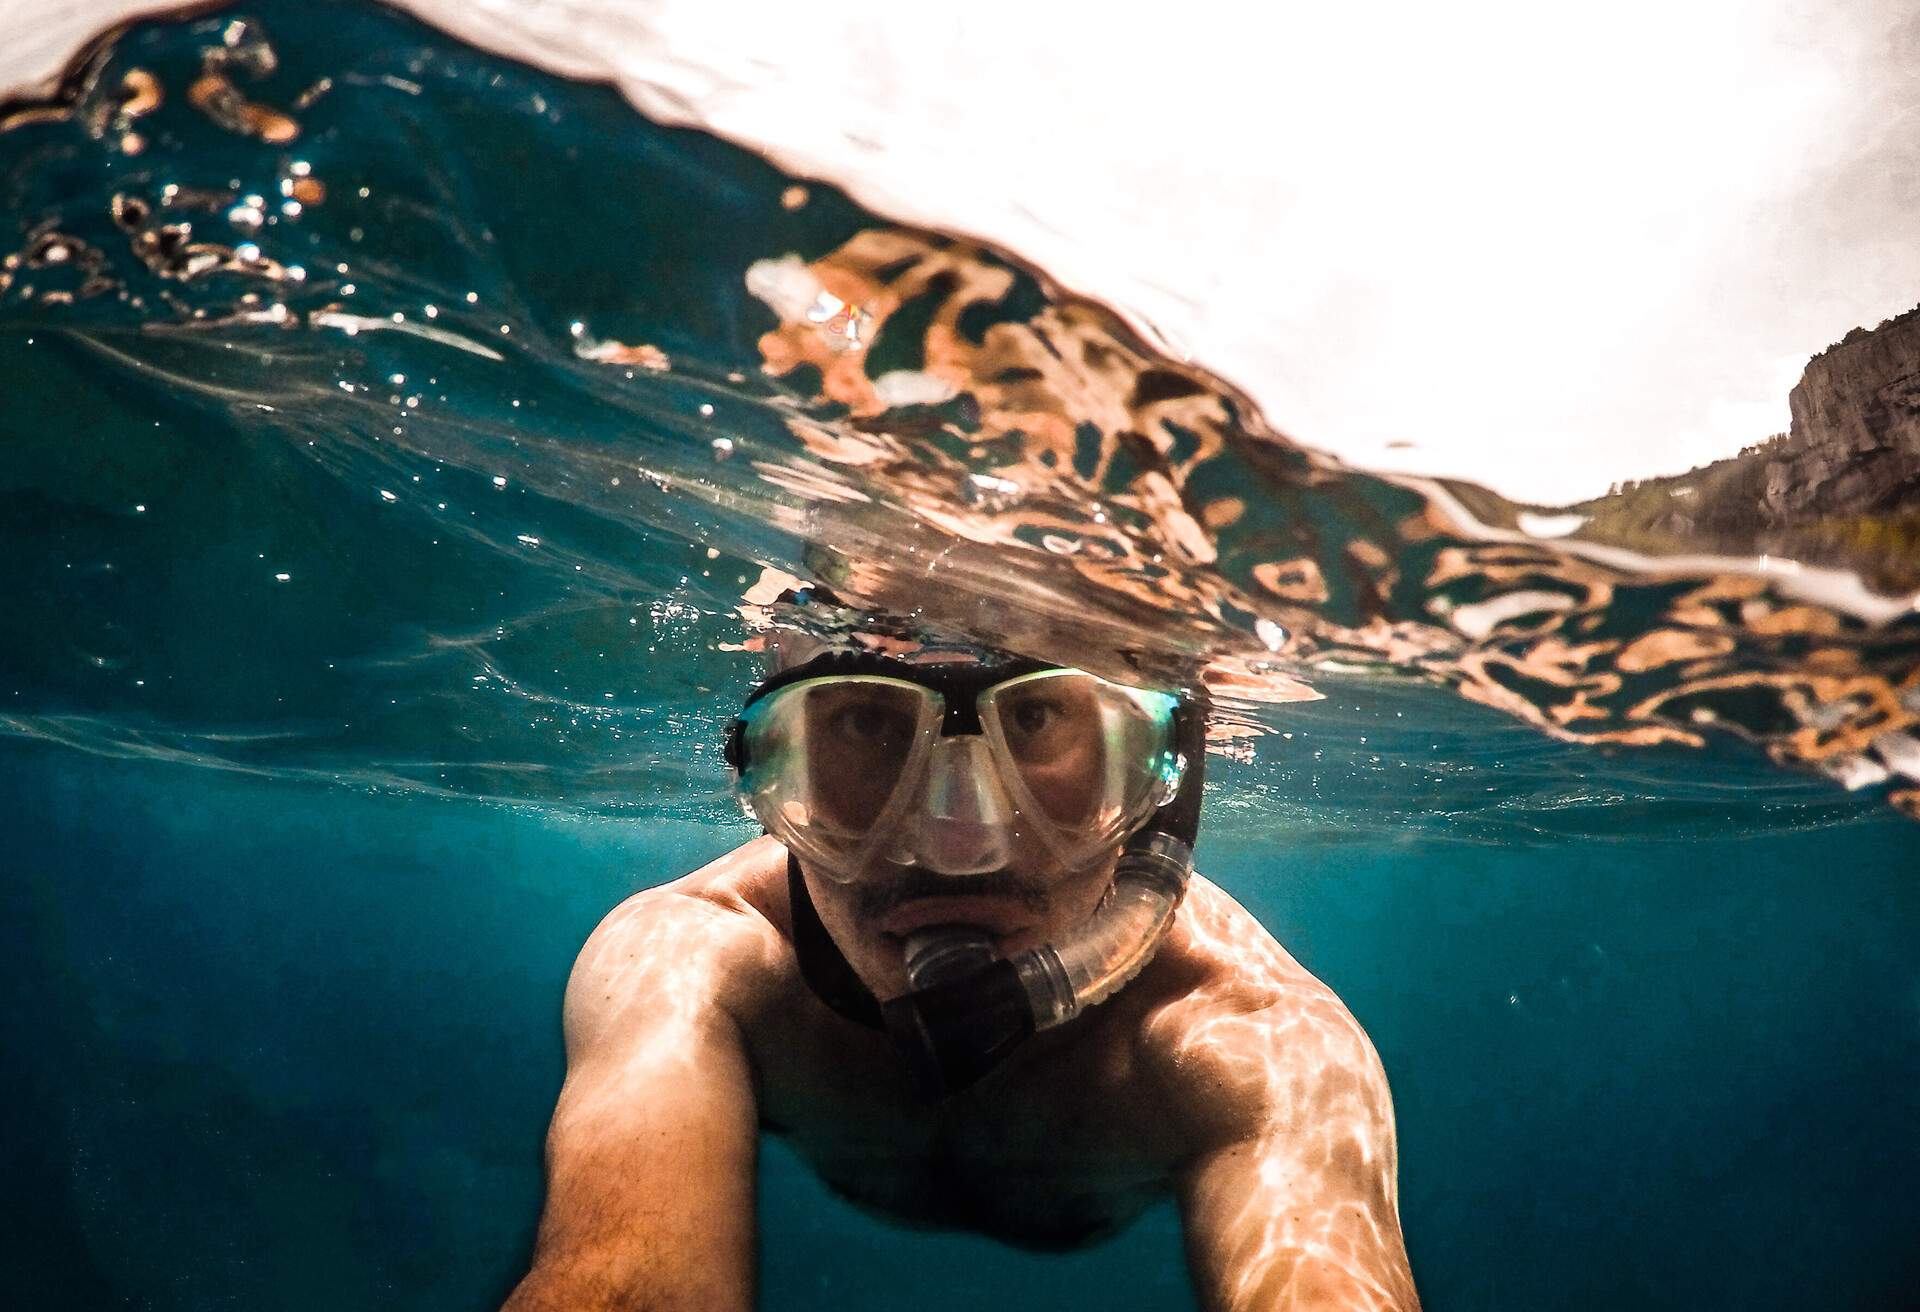 THEME_PEOPLE_MAN_SNORKELING_SEA_GettyImages-1130115909